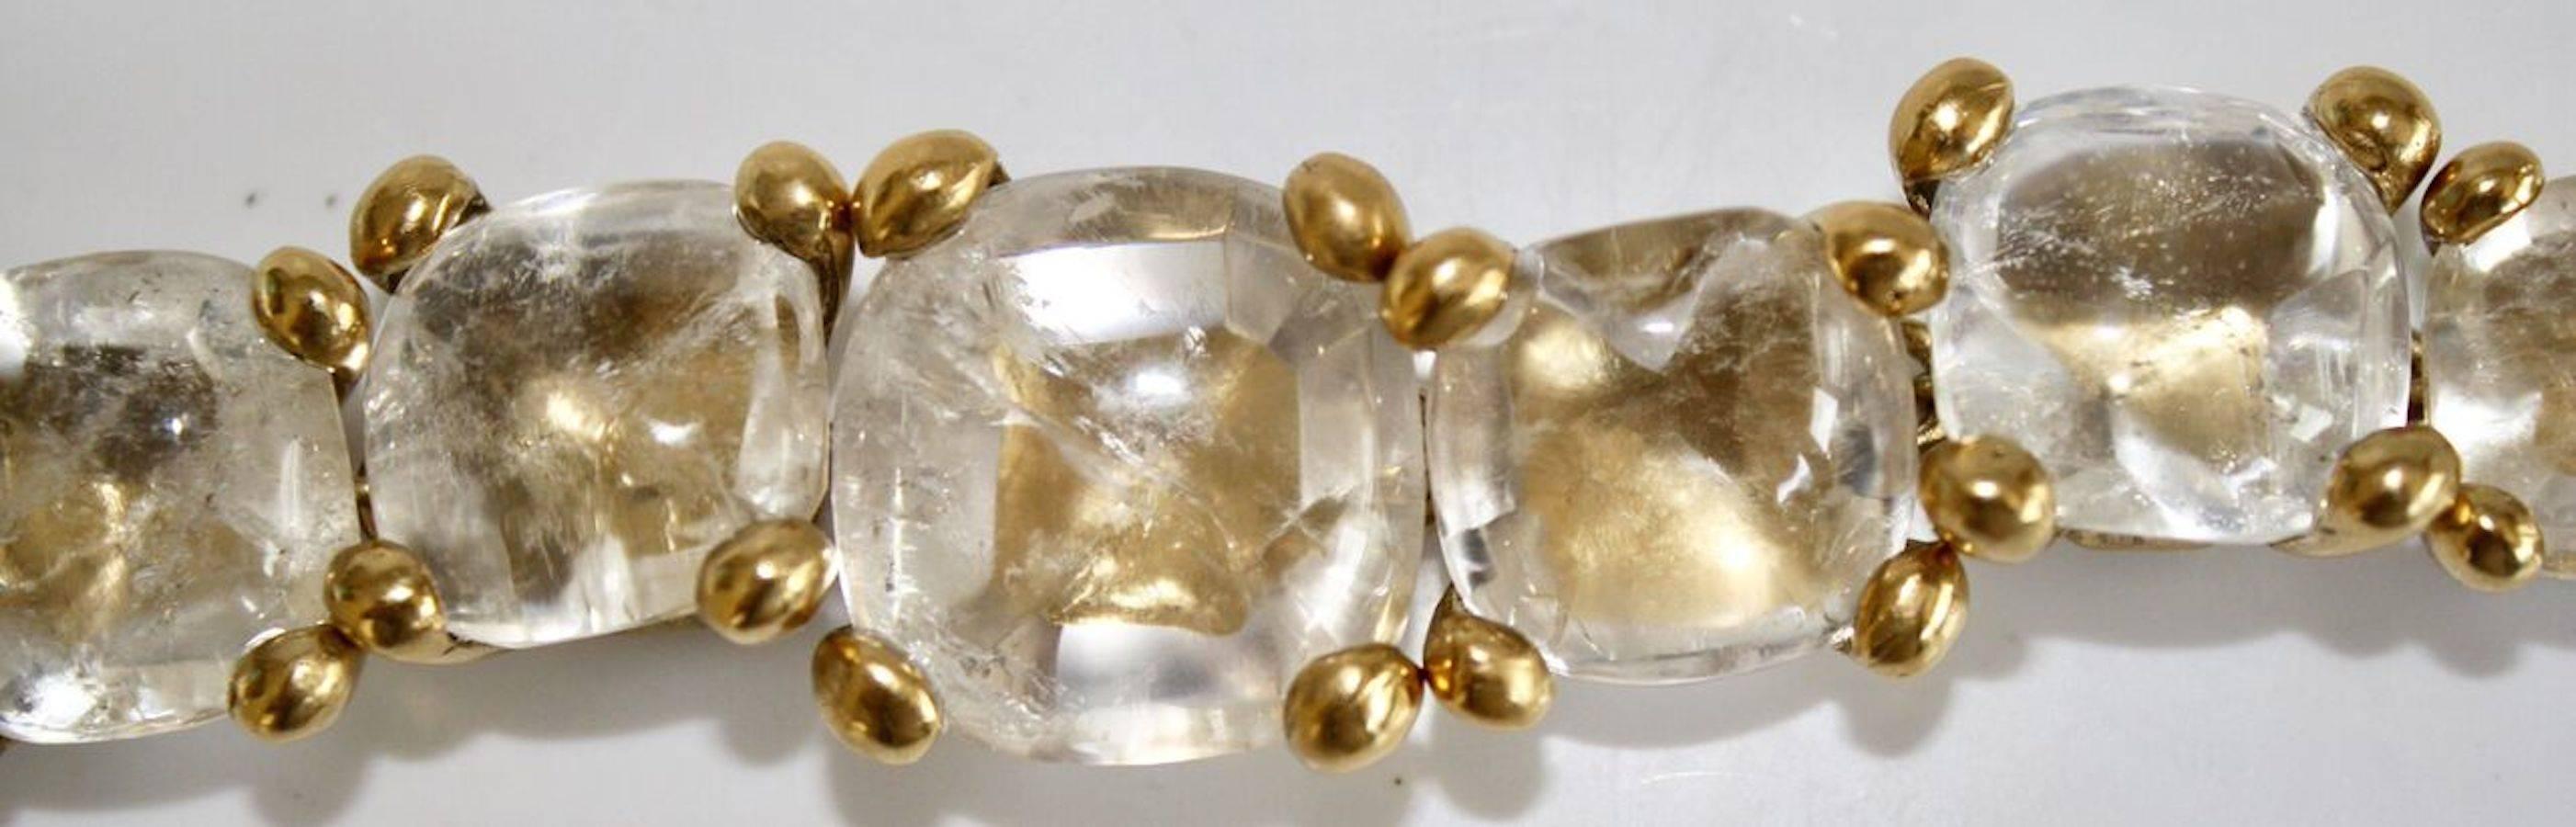 Eight gorgeous round rock crystals come together to create this fabulous classic bracelet from Goossens Paris. 